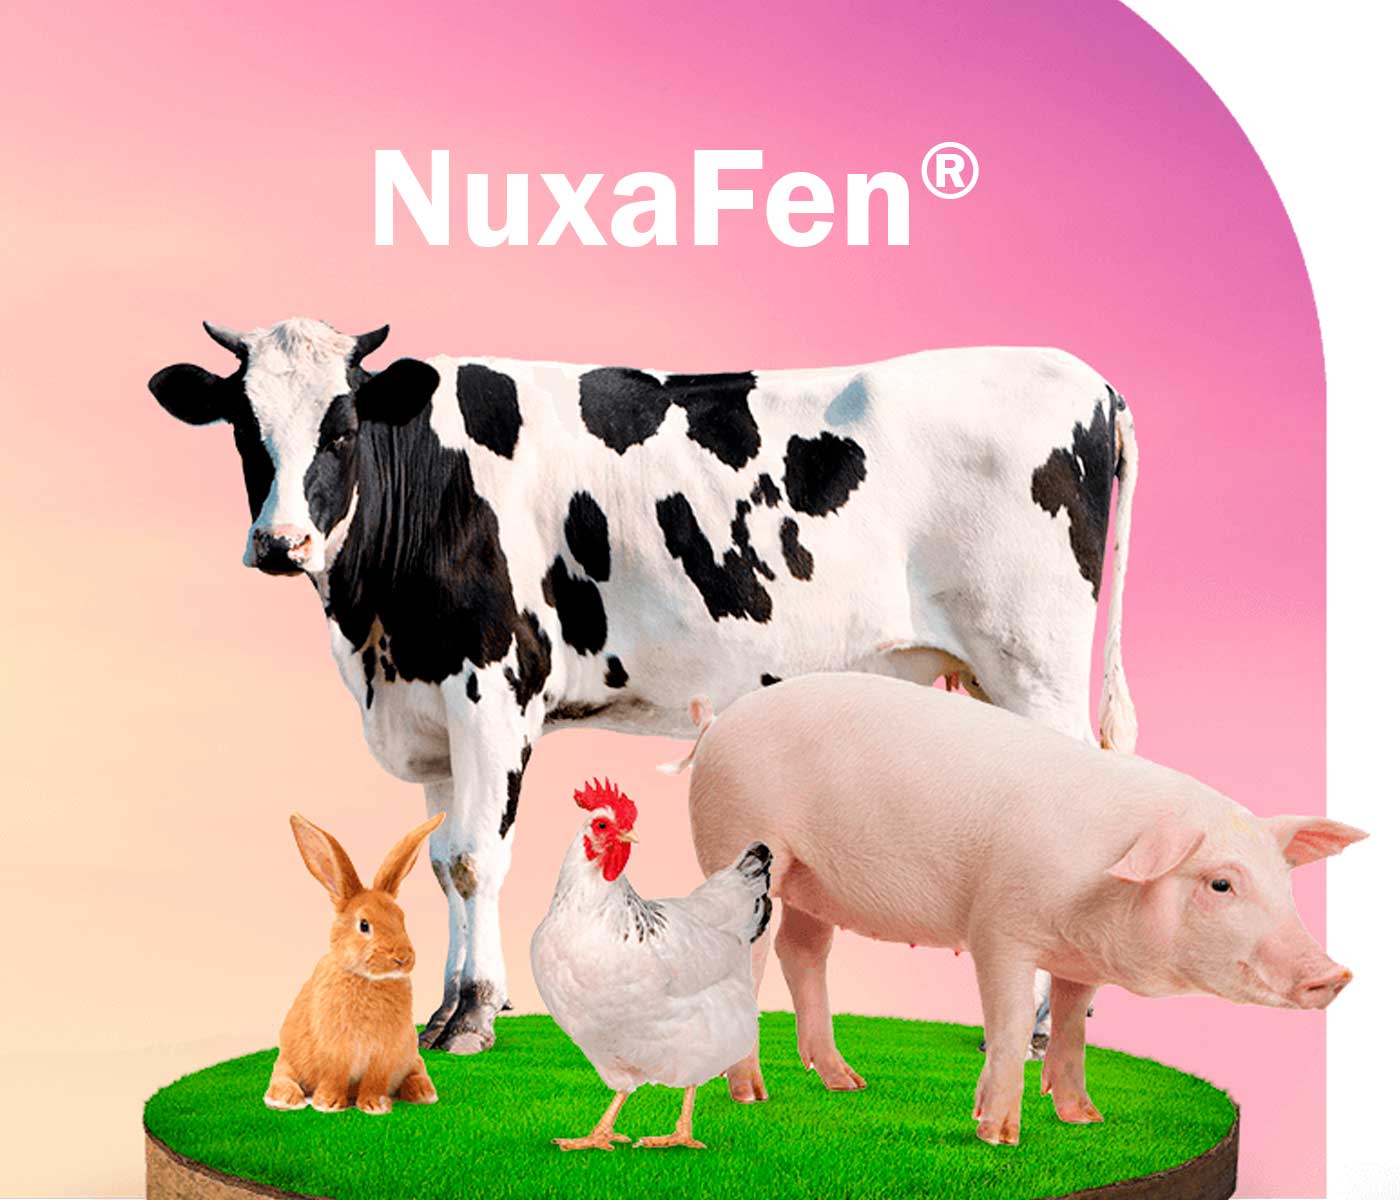 NuxaFen®: Cost-effective antioxidant innovation for animal nutrition